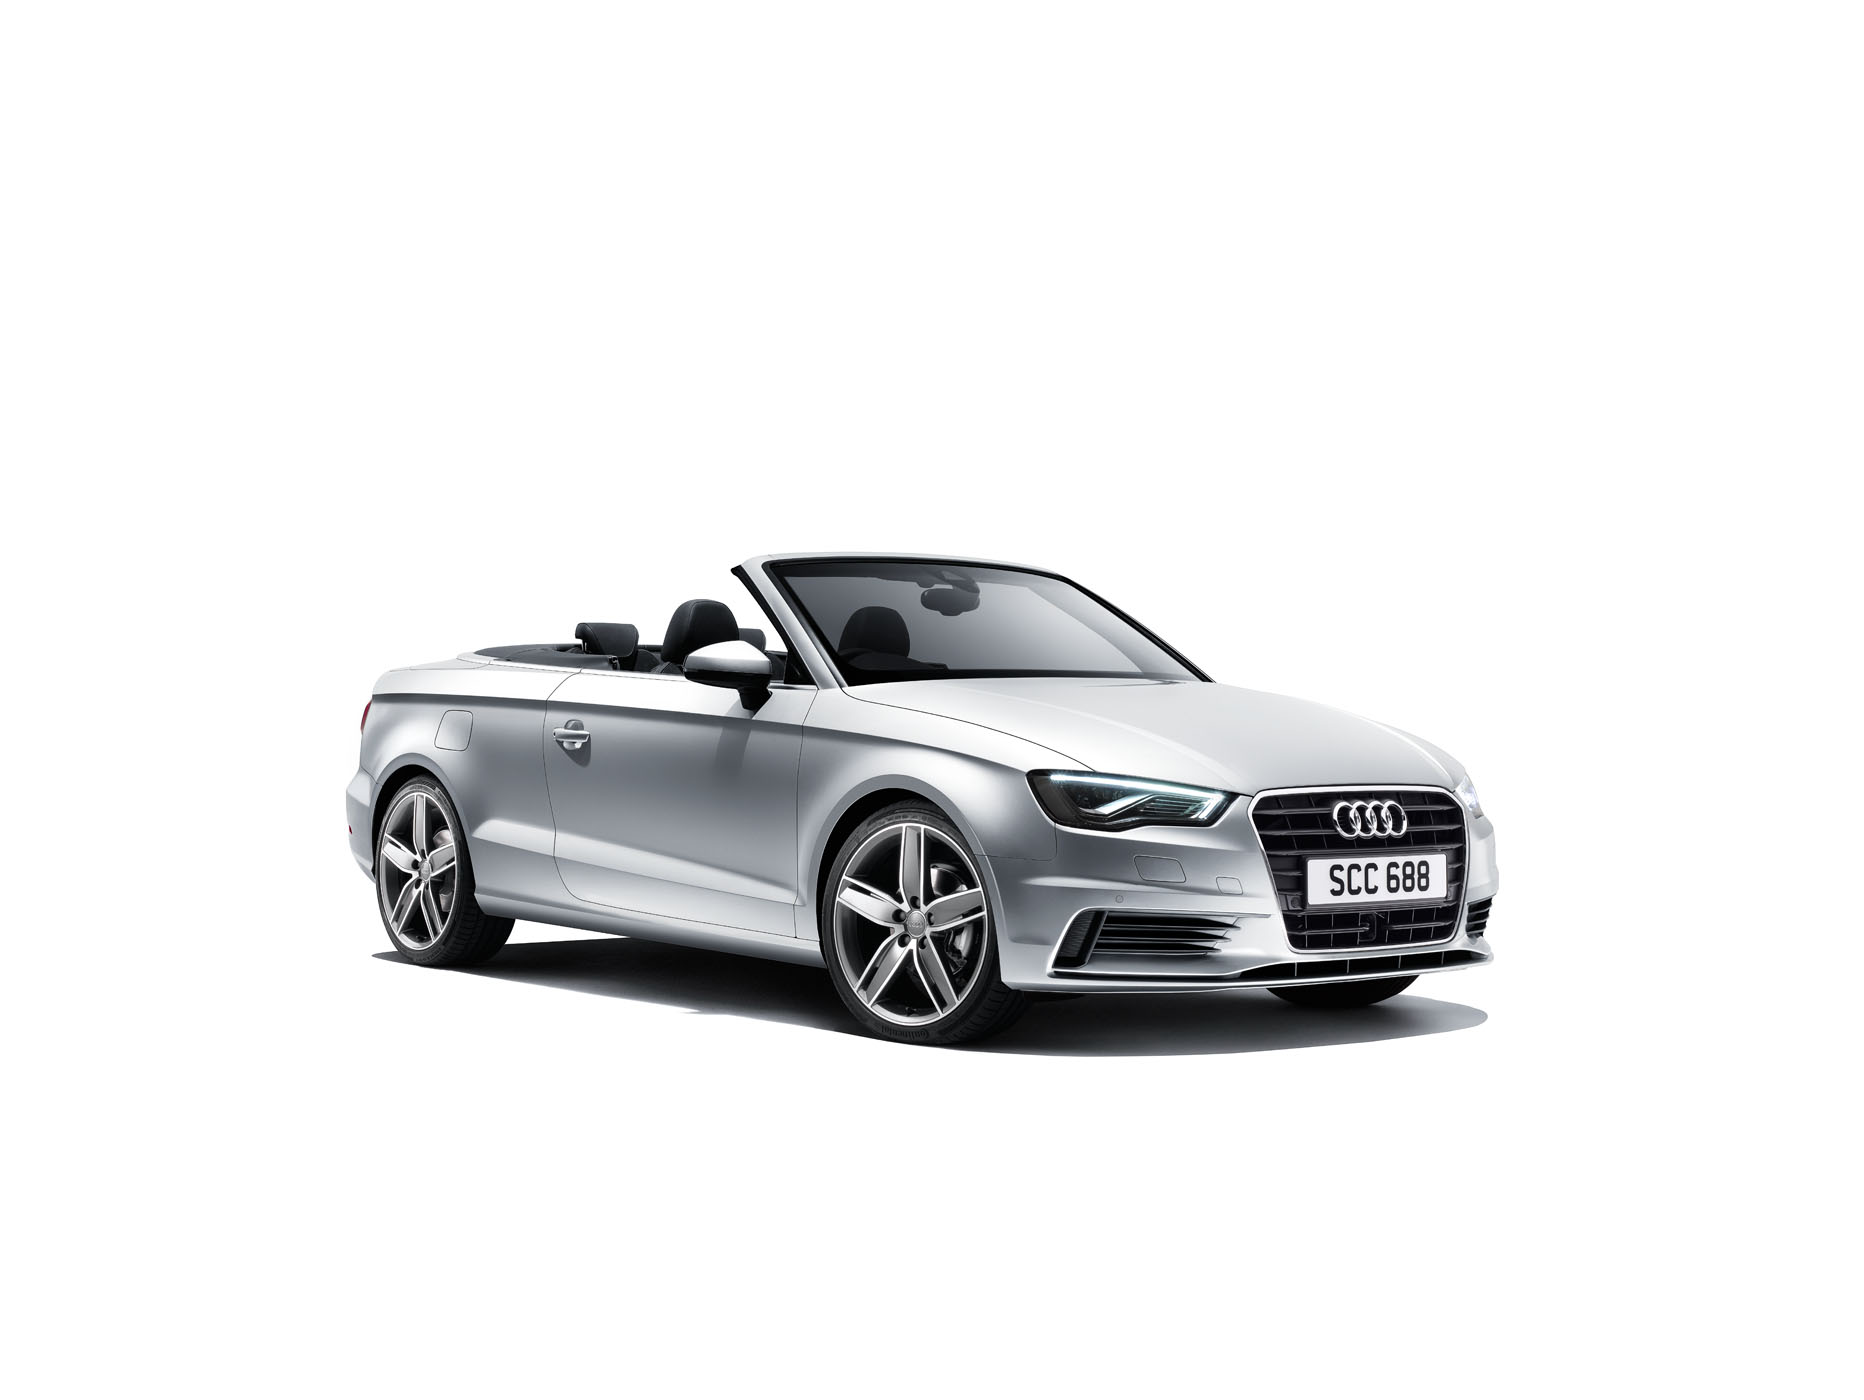 Silver Audi by Alexander Kent London based still life and product photographer.